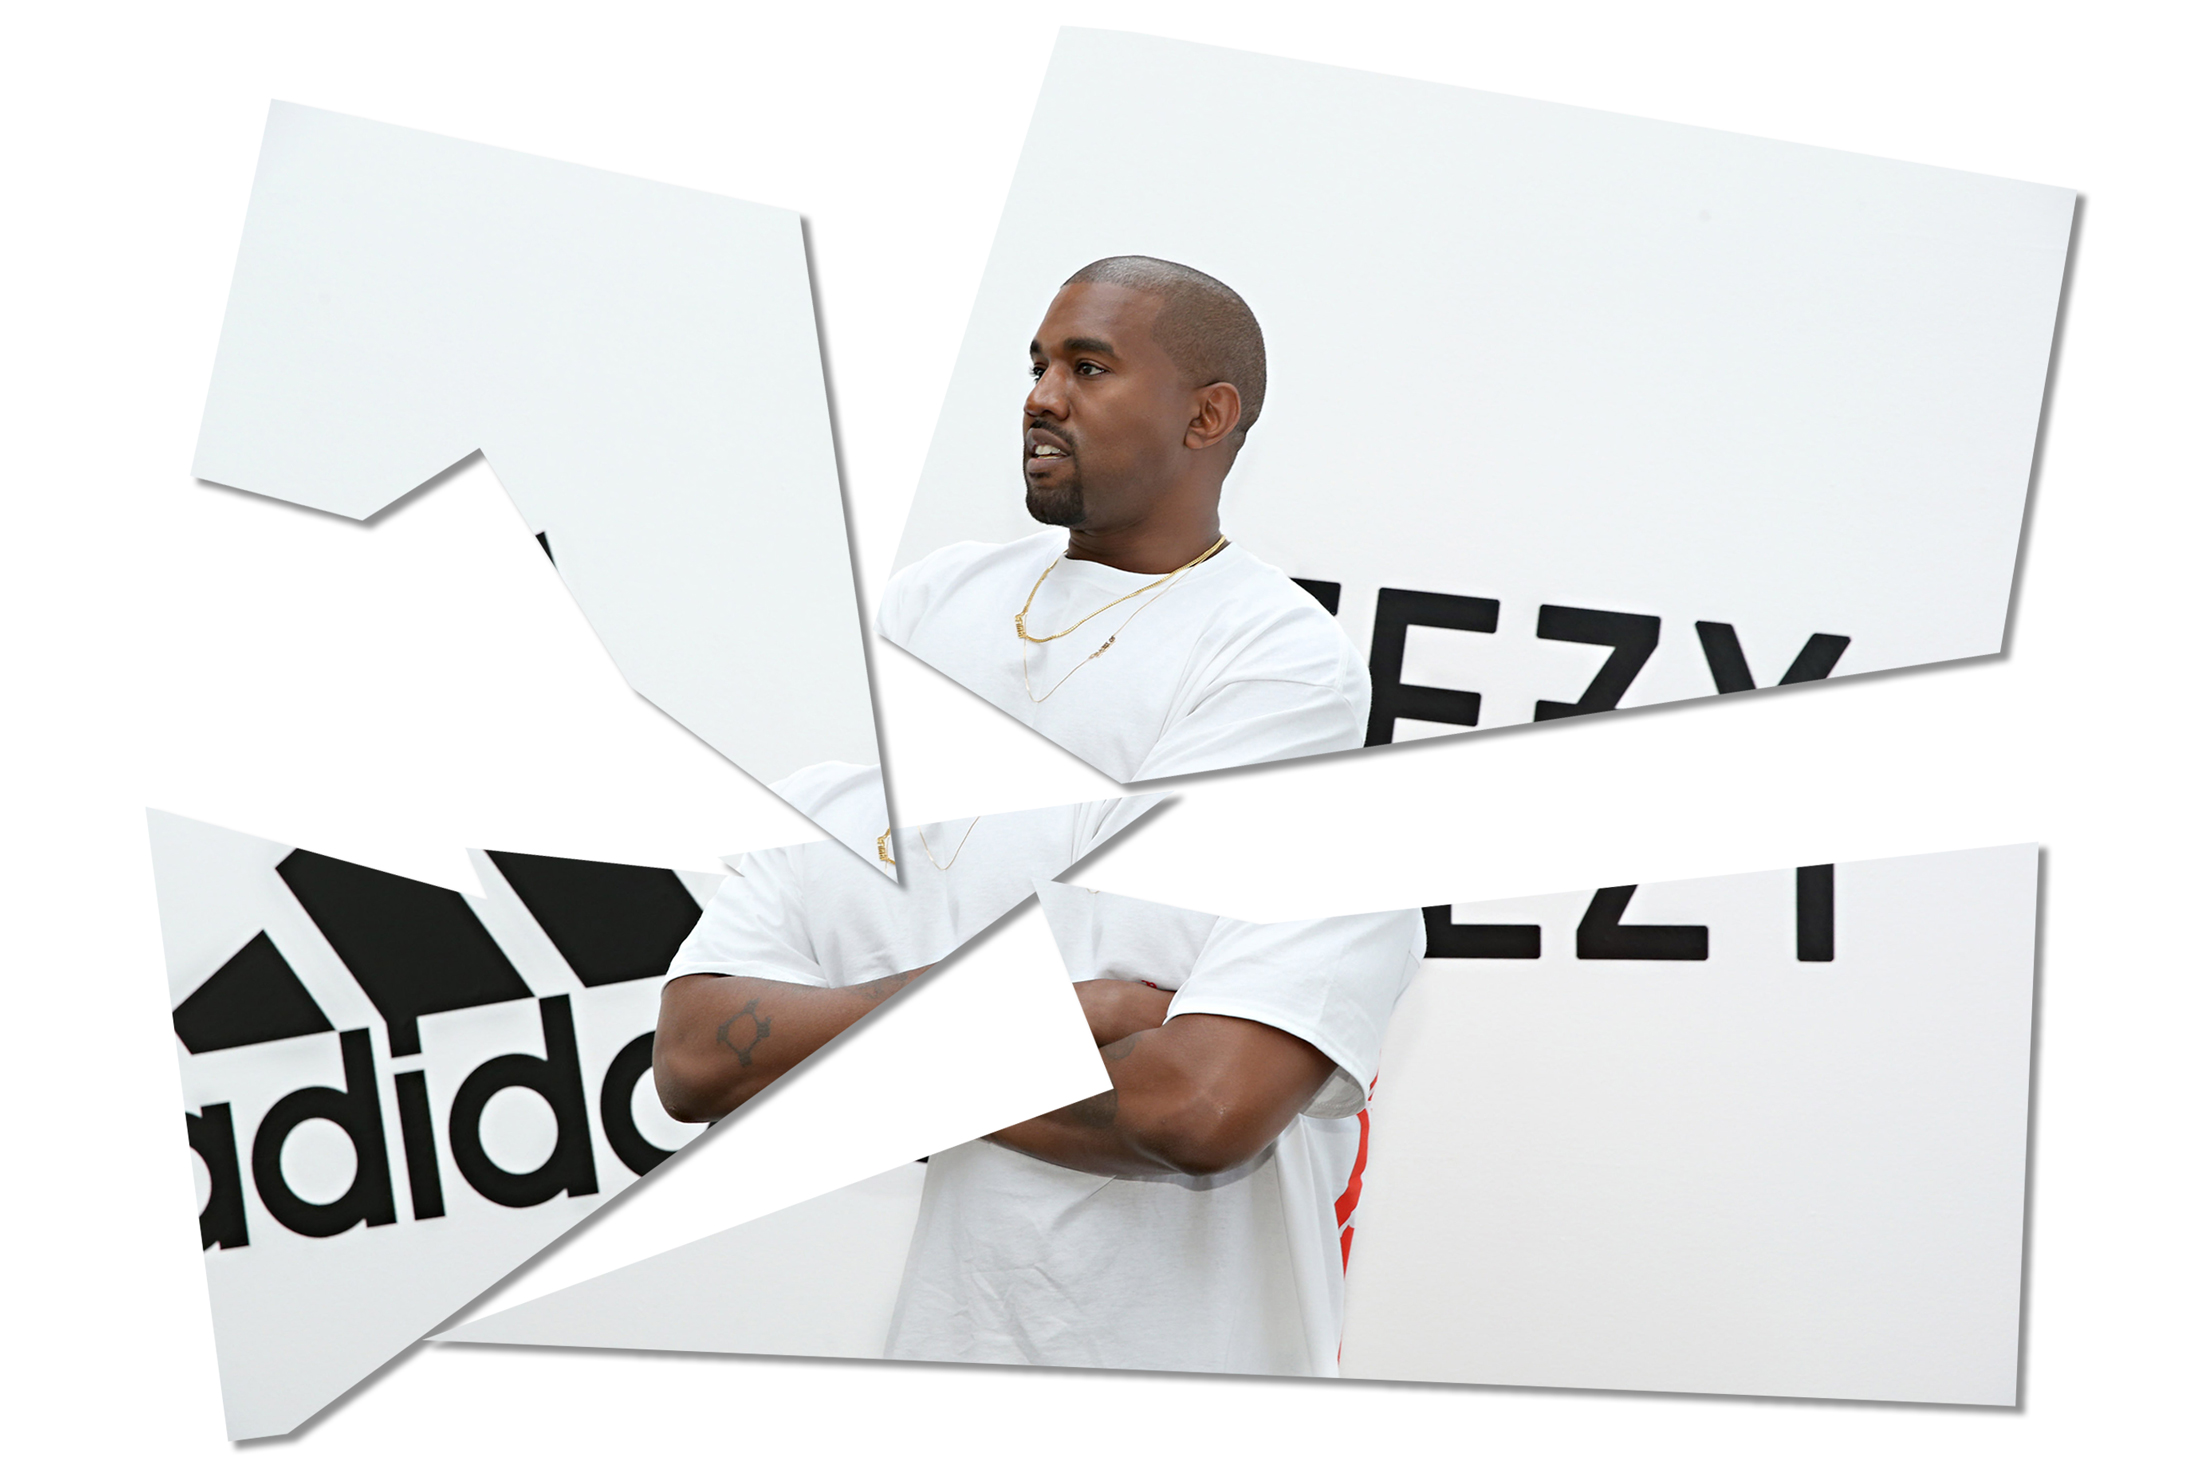 Adidas x Kanye West: The Sexiest Streetwear Collection